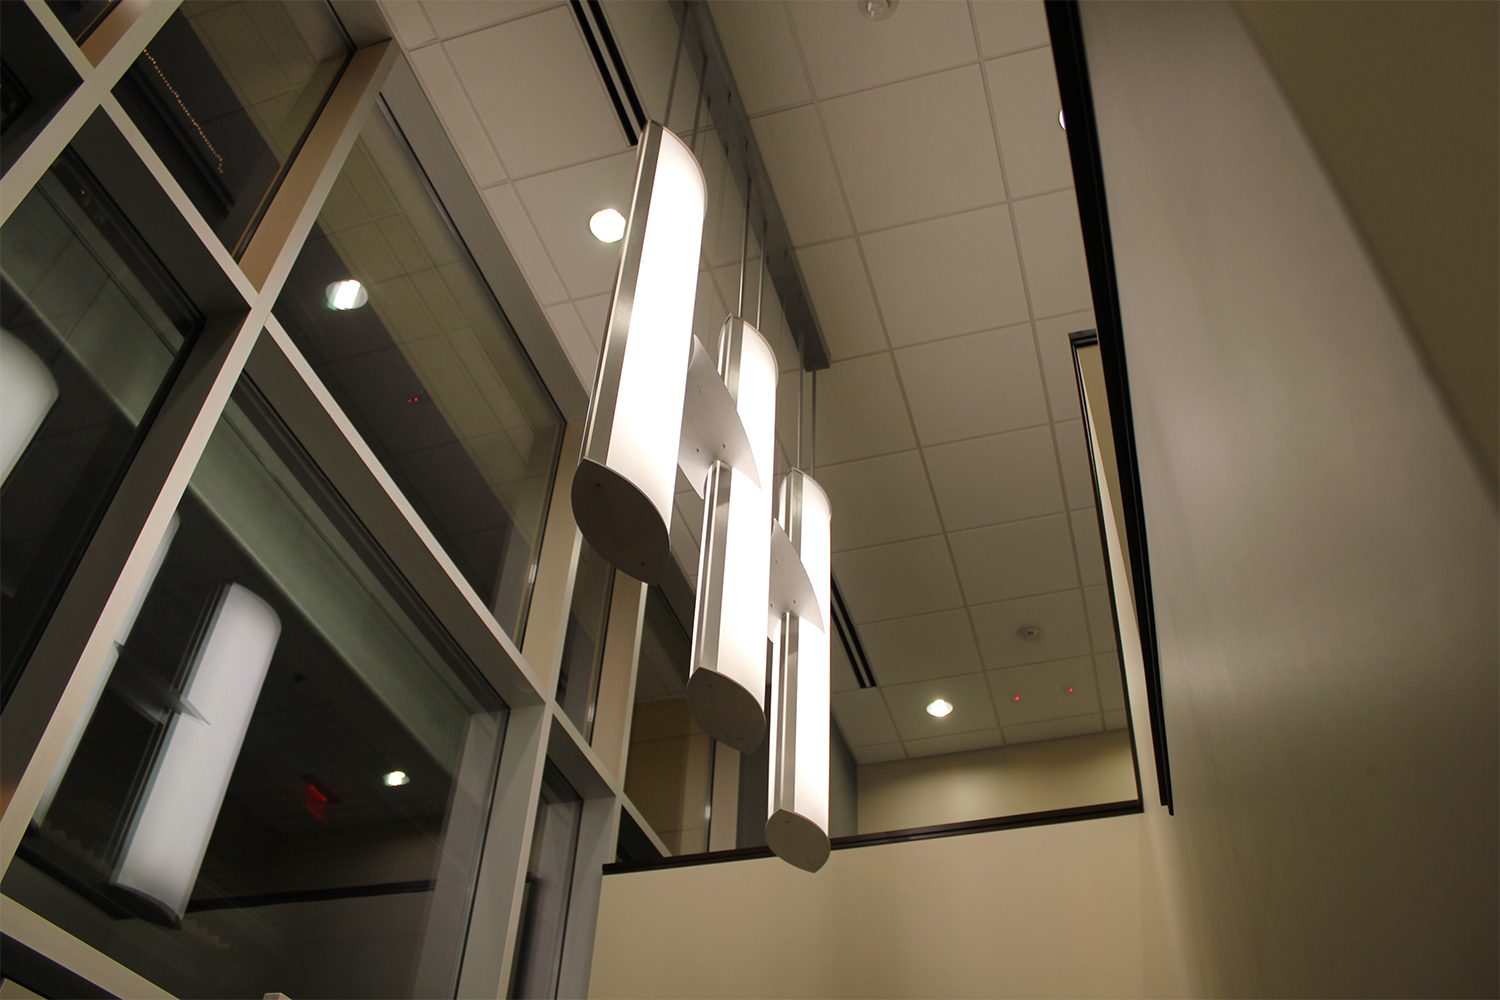 Air Foil pendants hung in a group of three for a stylish hospital lighting design.